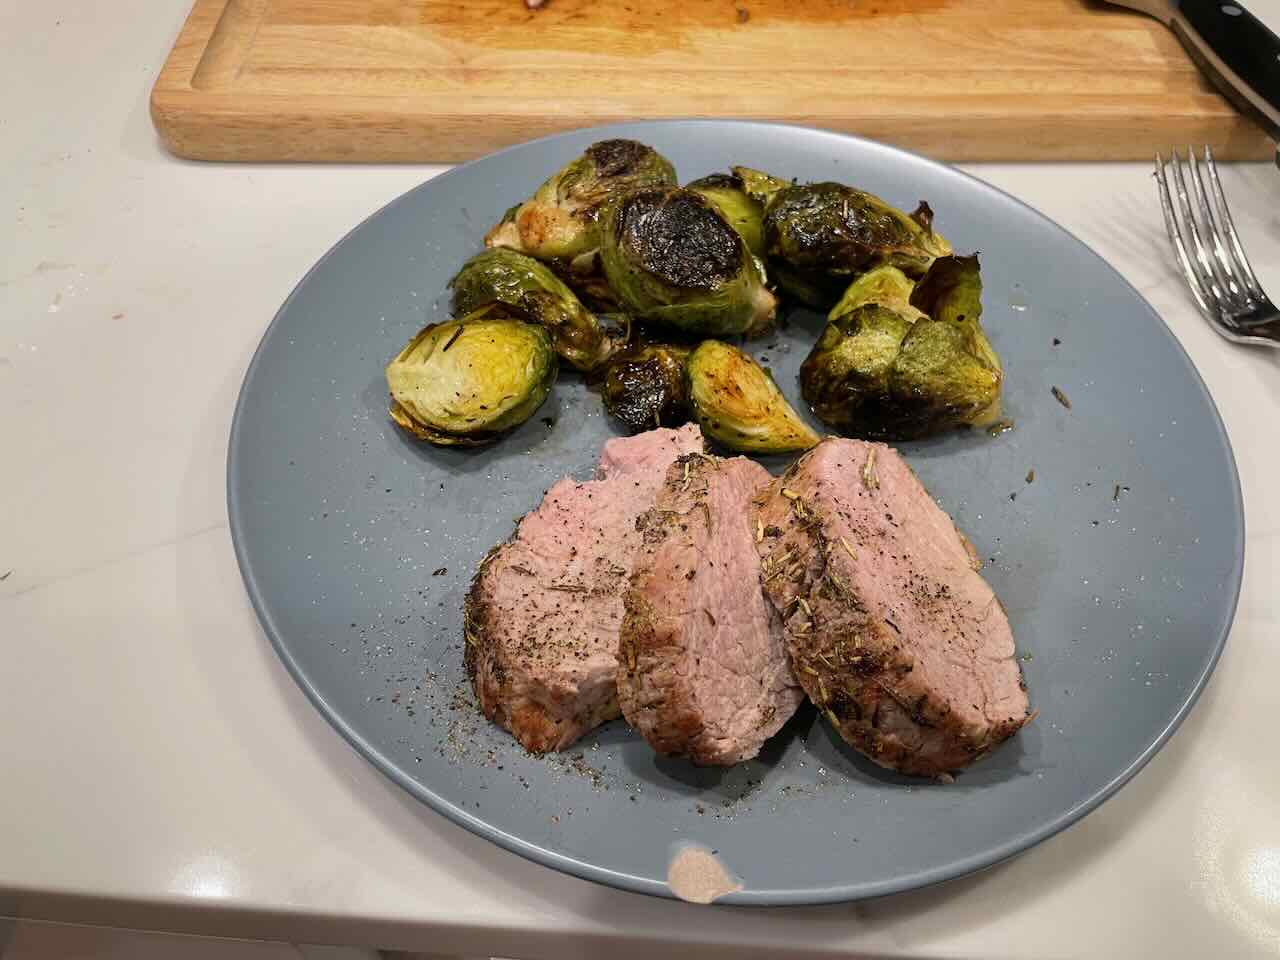 Tenderloin medallions and sprouts, plated.